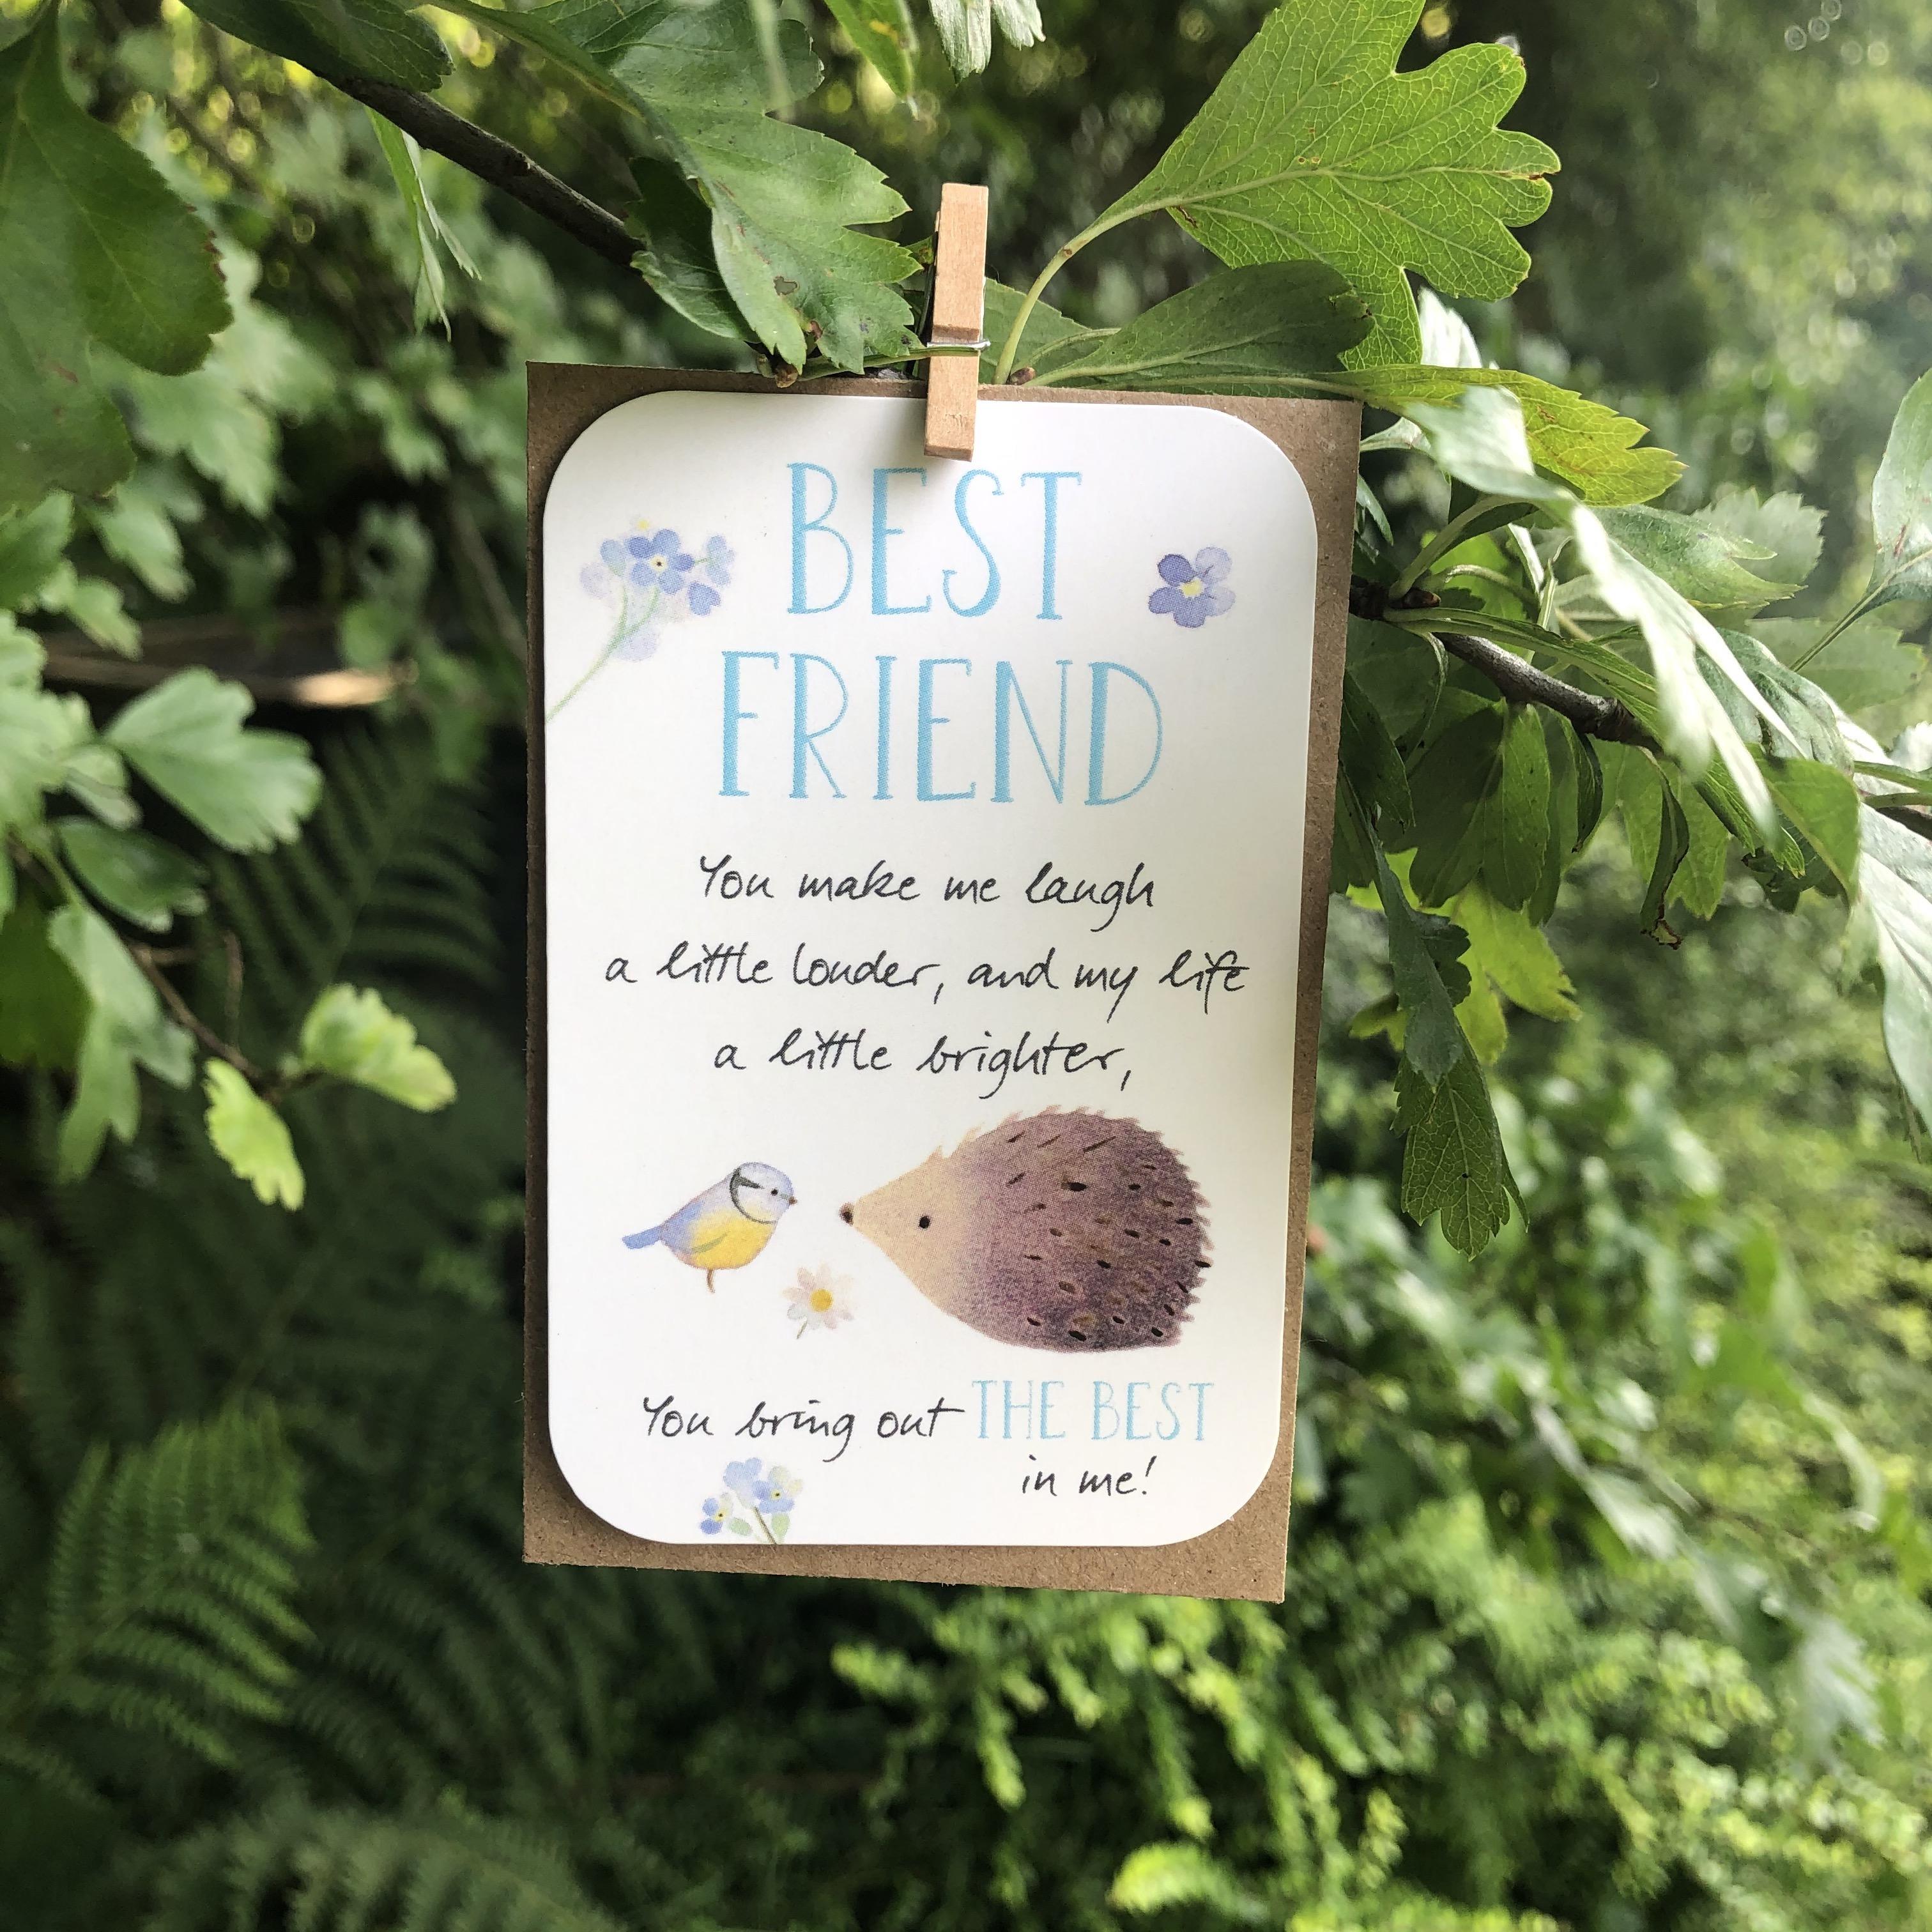 A small keepsake card with a 'Best Friend' caption, and lovely little verse